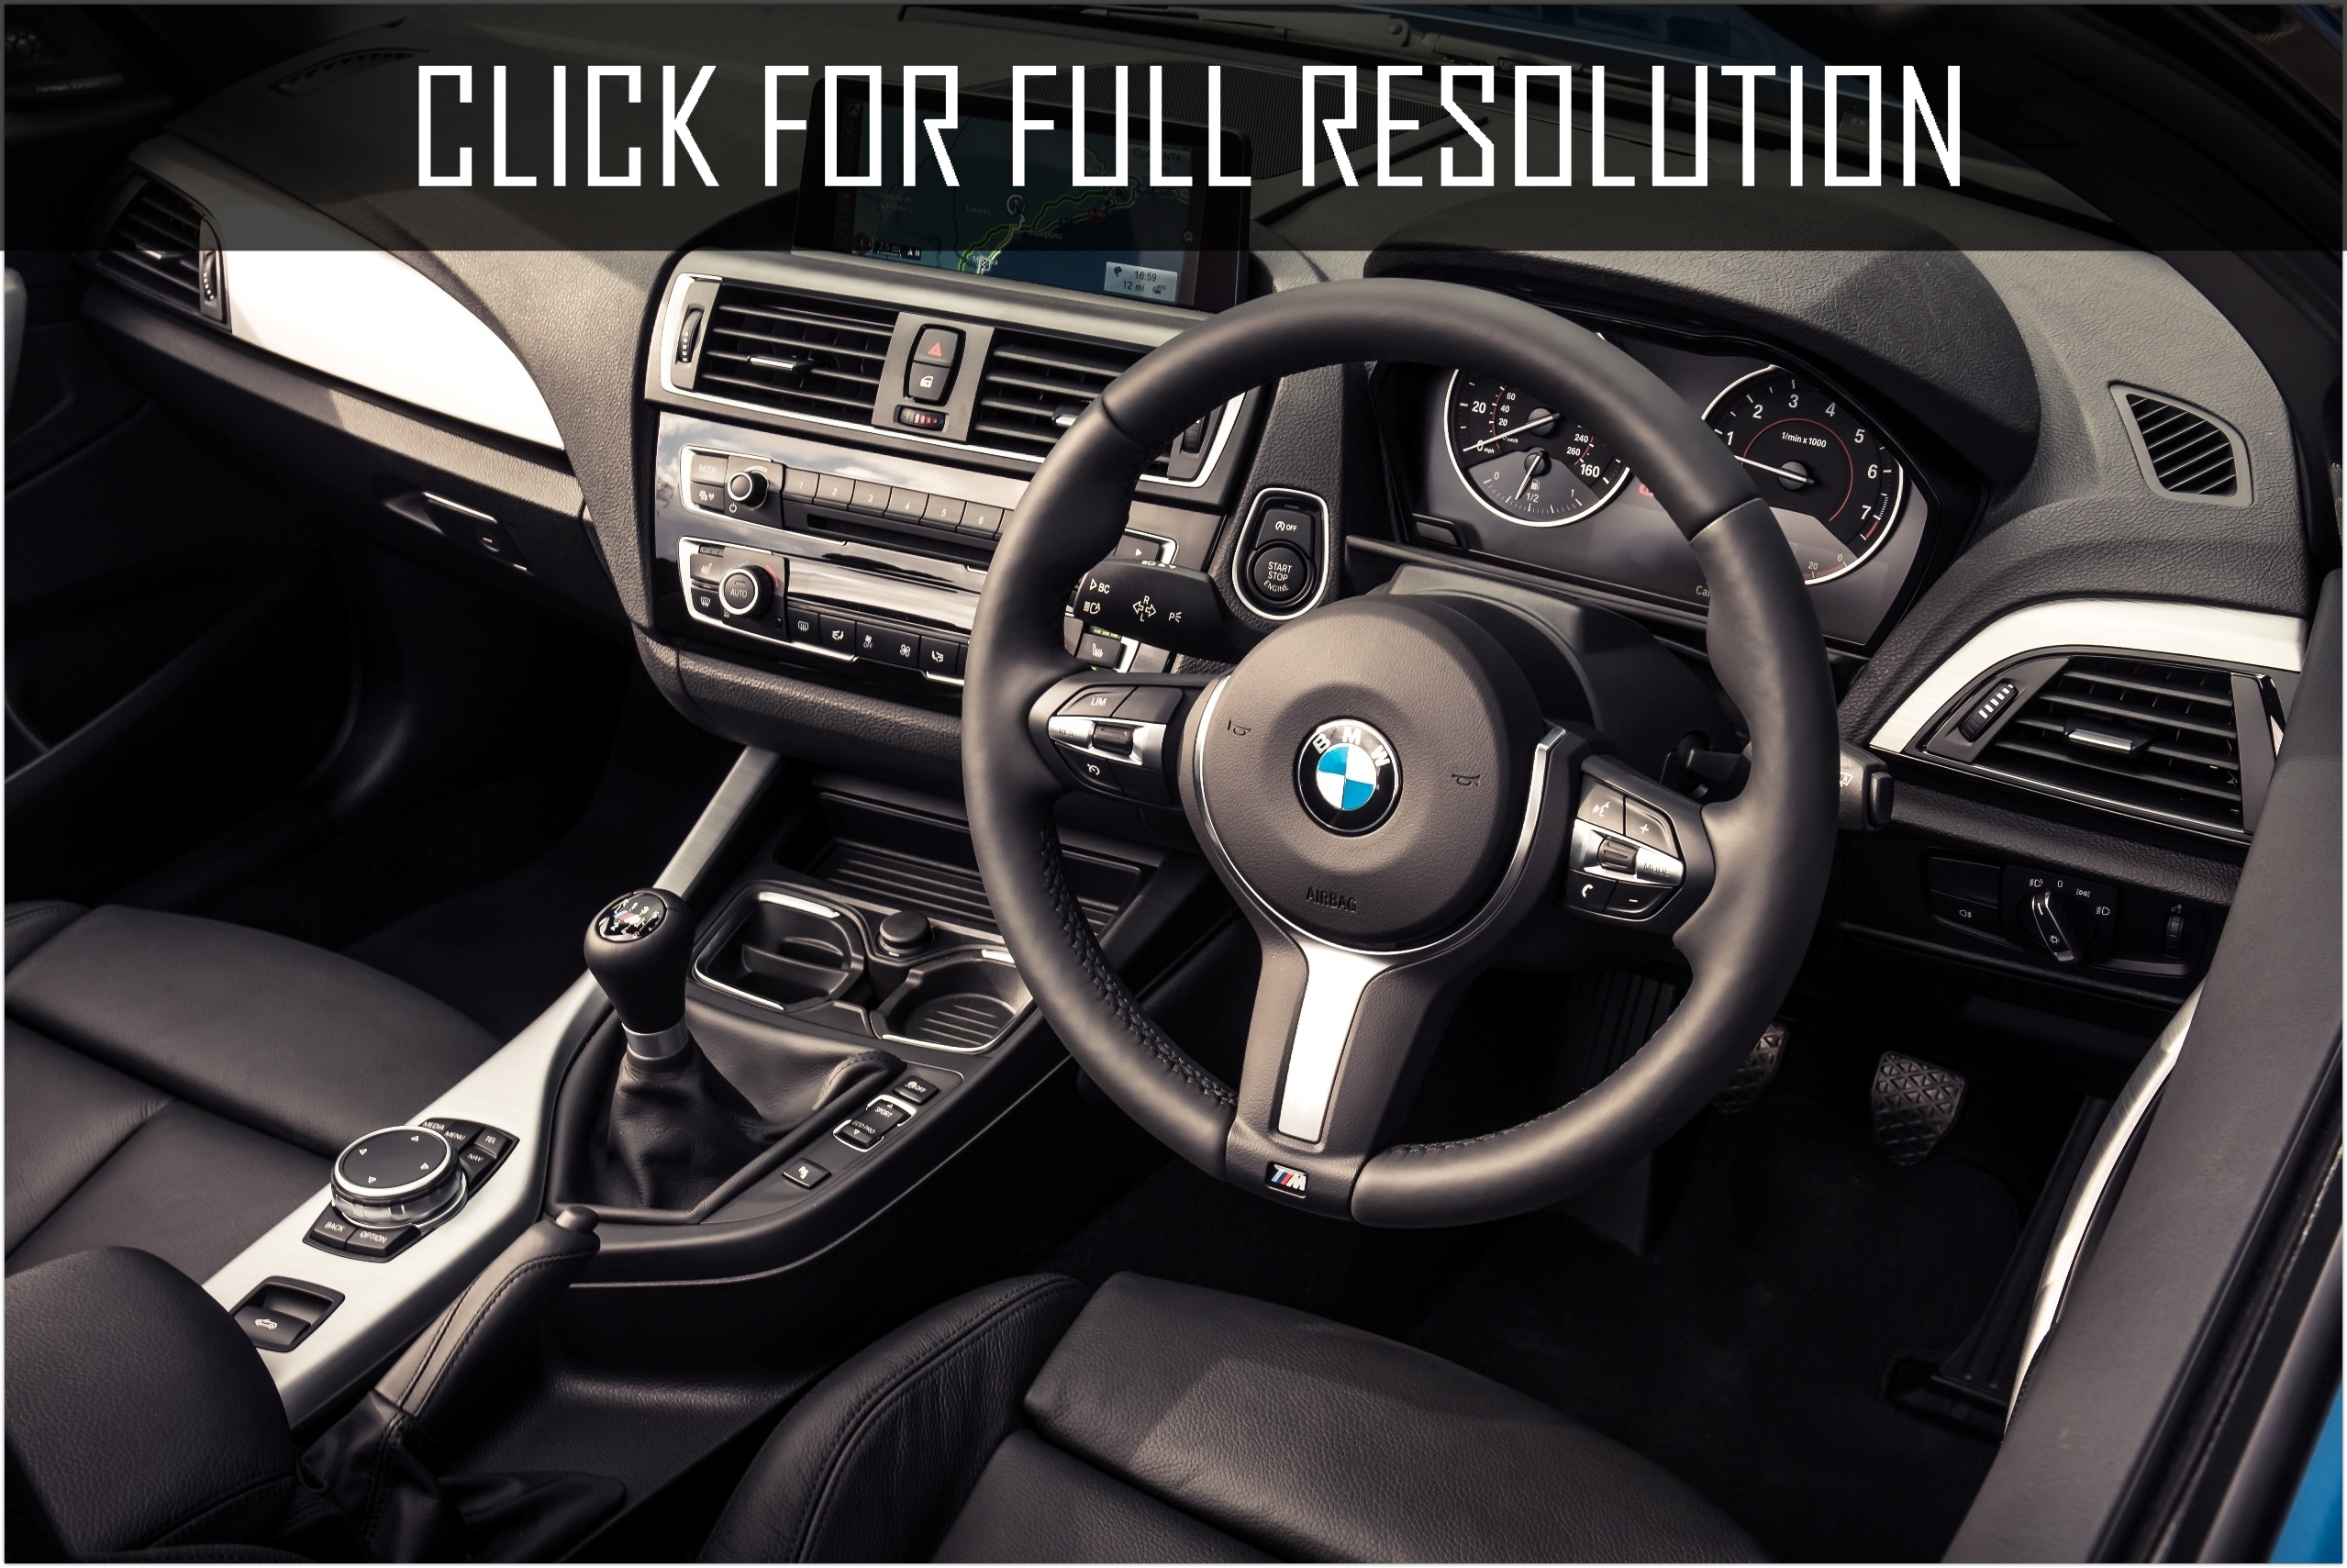 2015 Bmw 2 Series Convertible Best Image Gallery 14 14